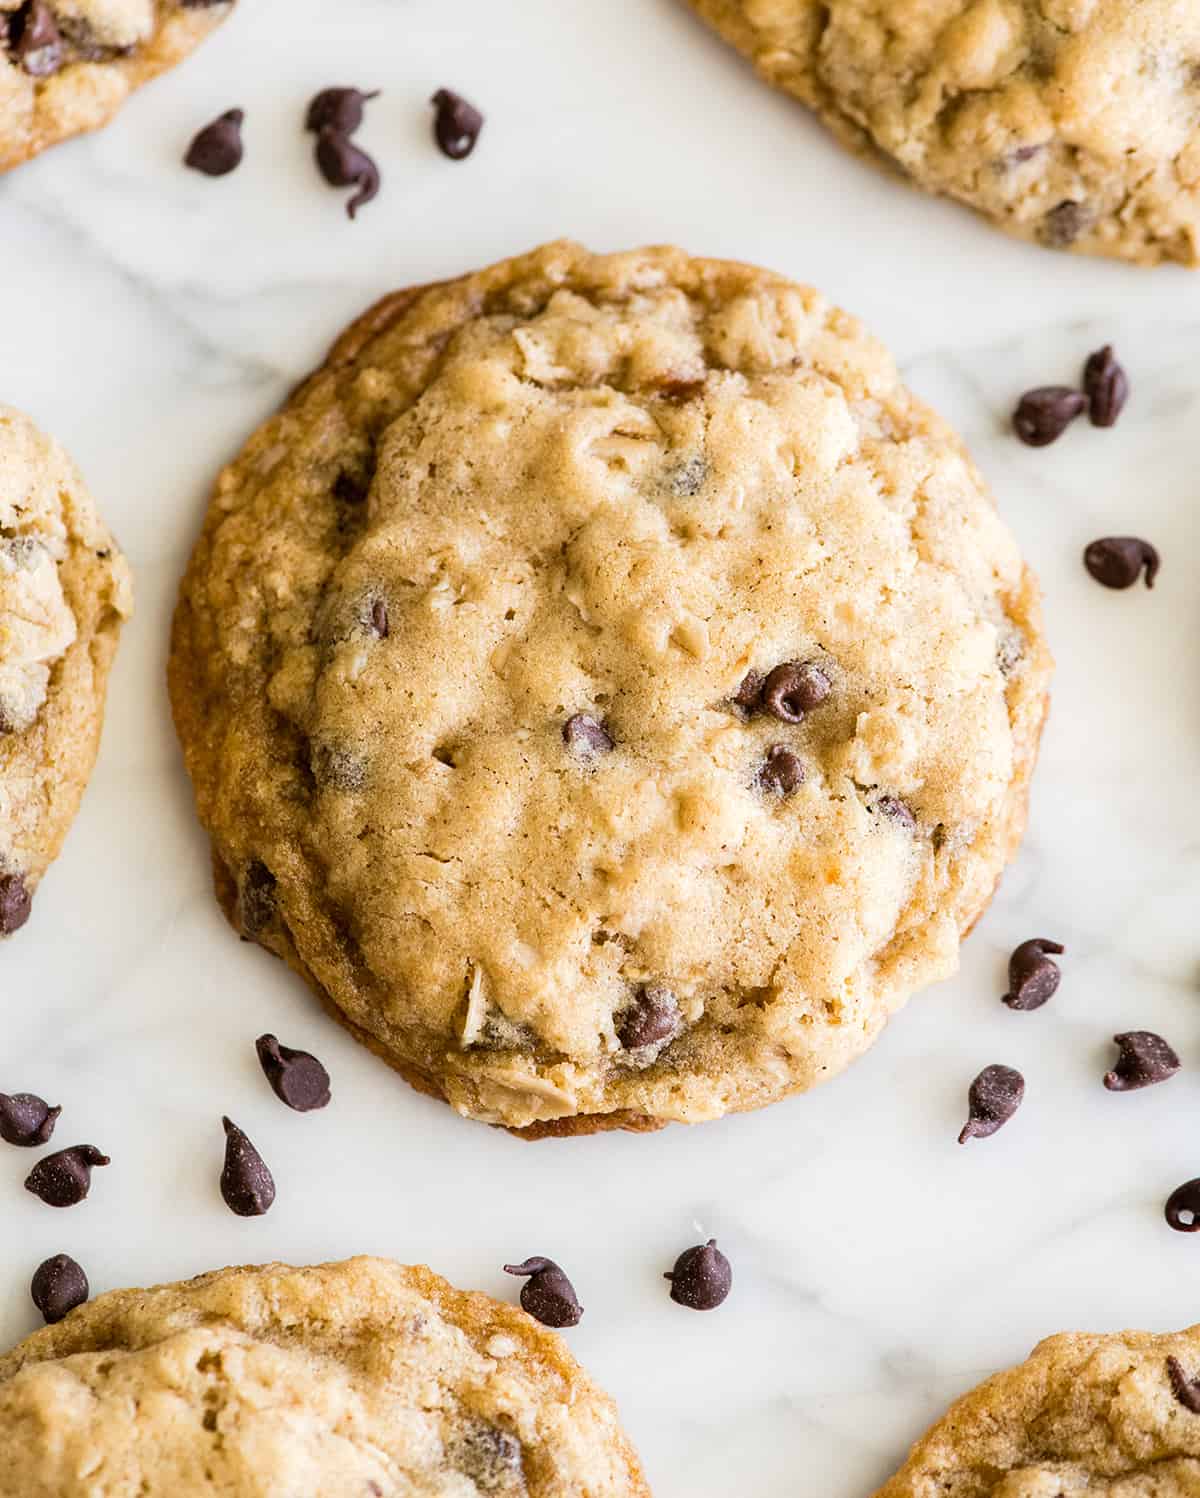 oatmeal cookies with chocolate chips